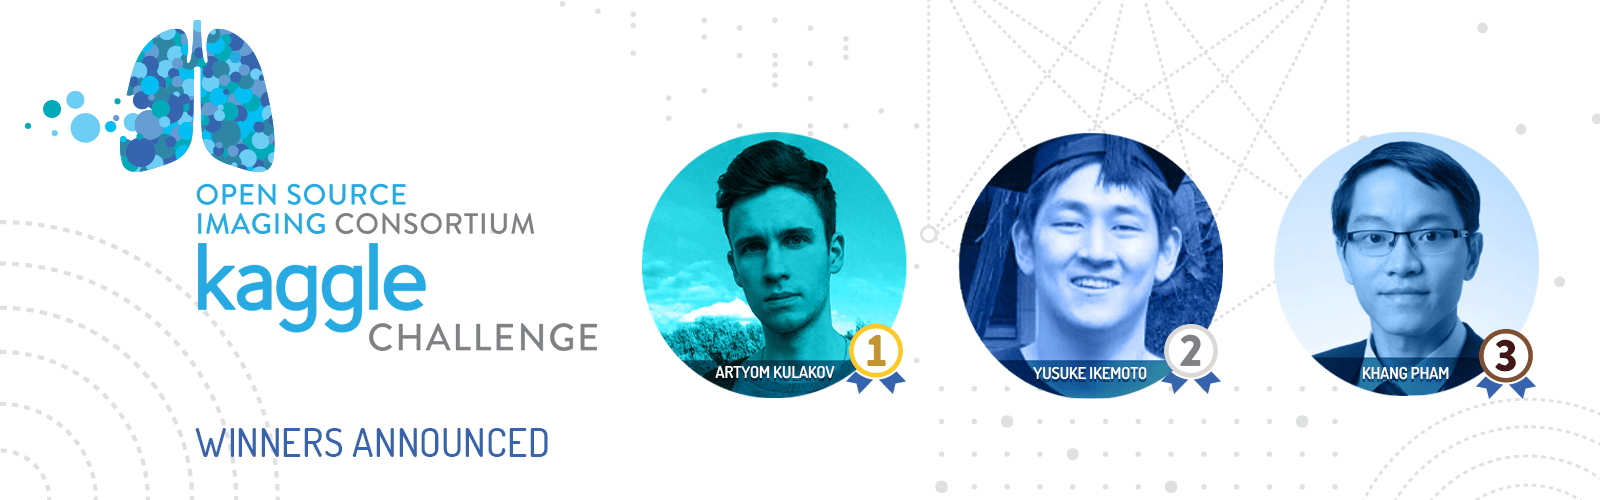 OSIC Kaggle Challenge Winners Announced. Photos of first, second and third place winners with corresponding numbered award badges overlaid